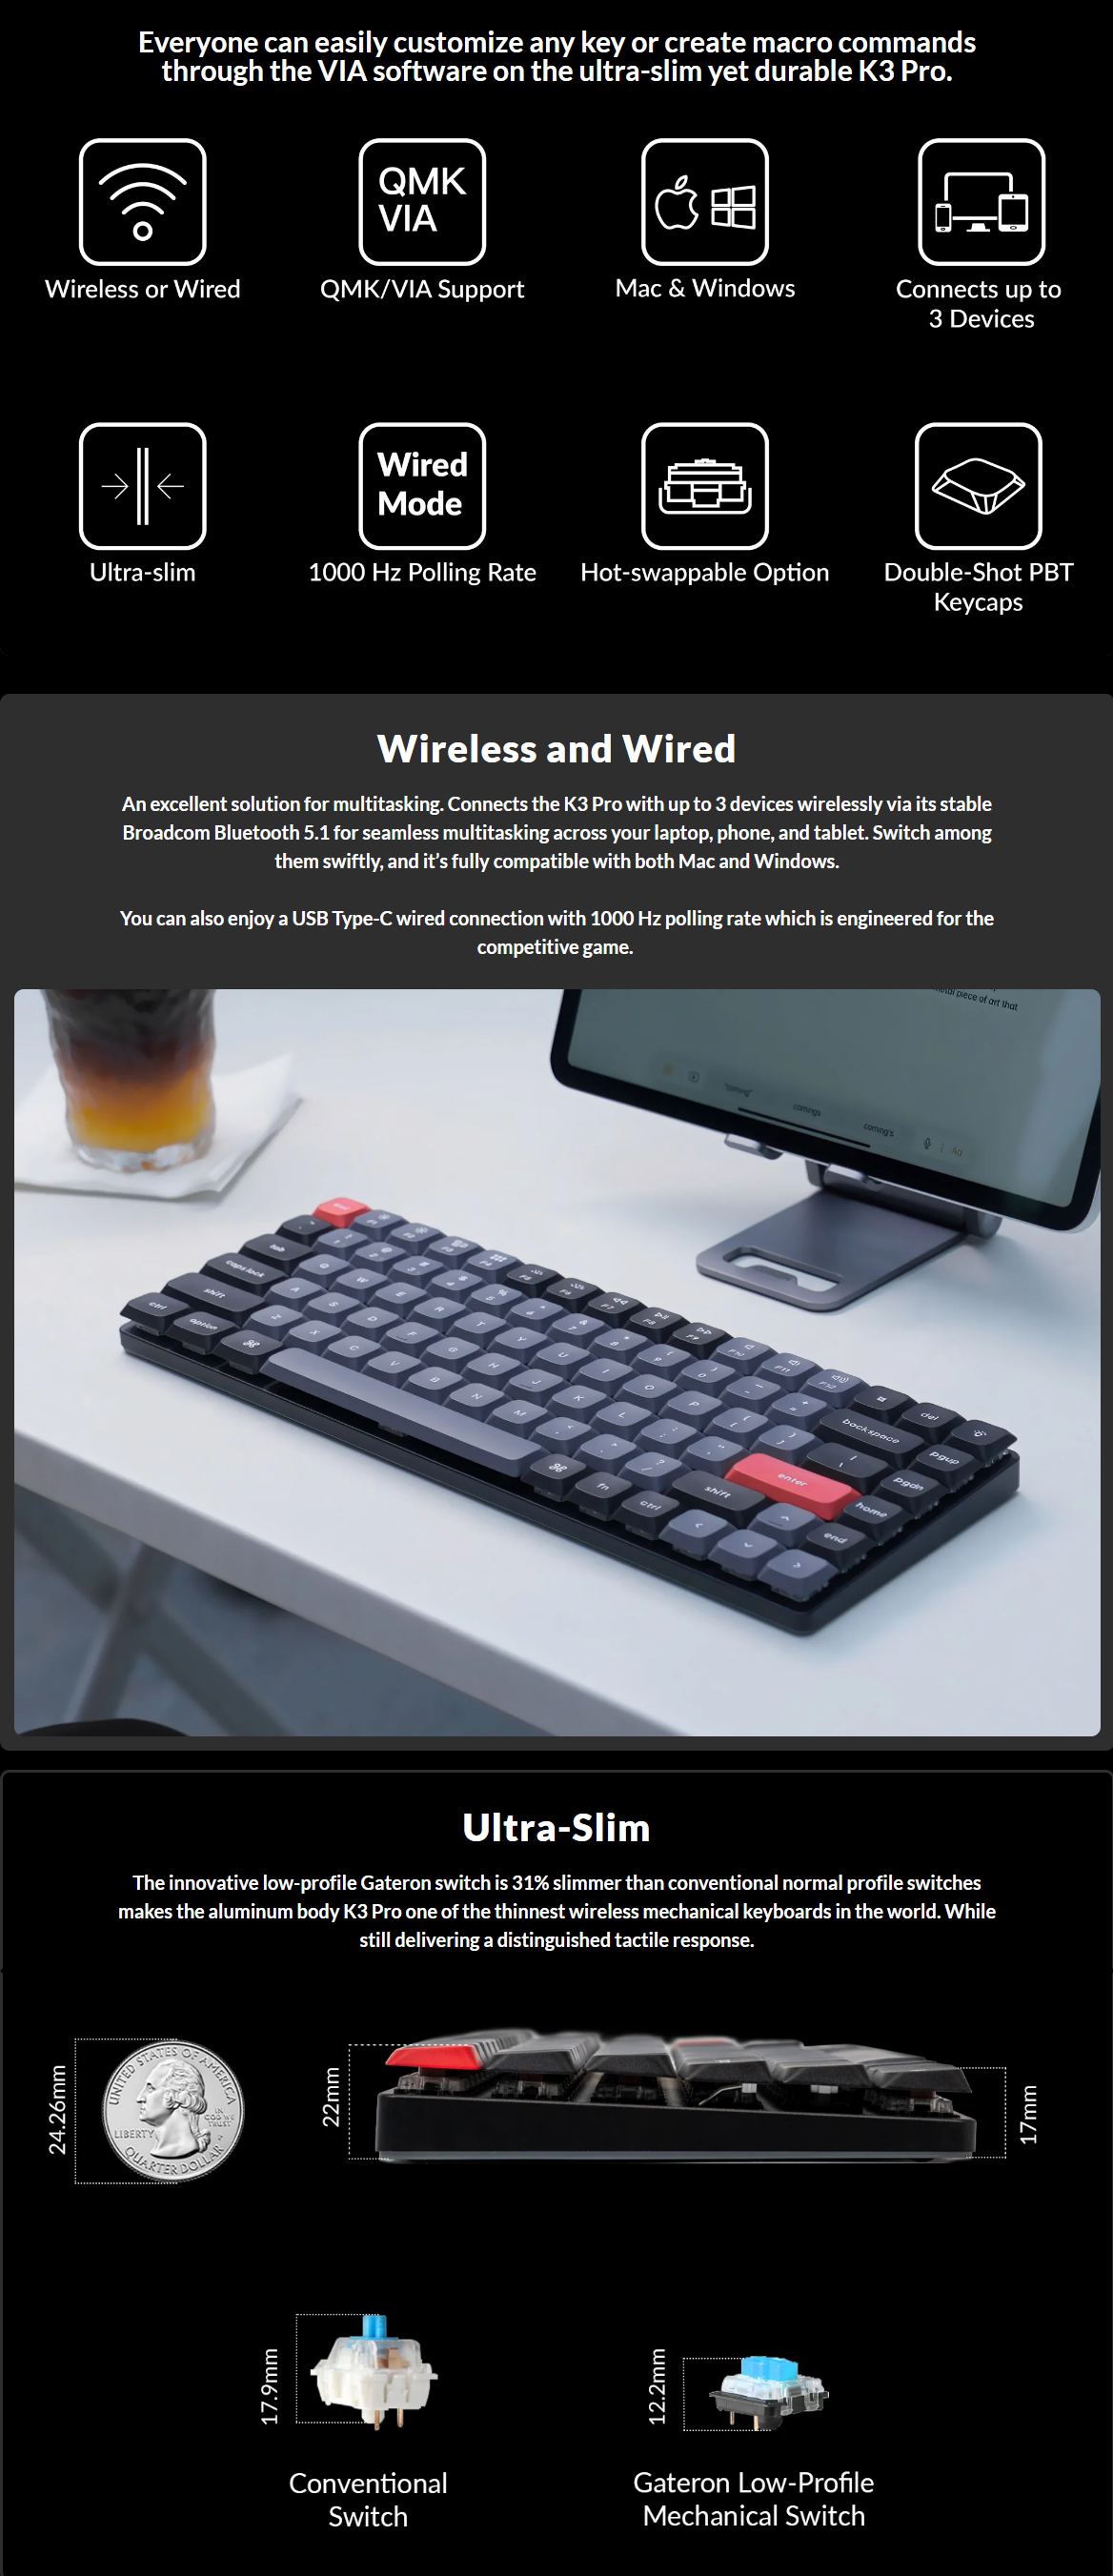 A large marketing image providing additional information about the product Keychron K3 Pro RGB QMK/VIA Wireless Custom Mechanical Keyboard - White (Red Switch) - Additional alt info not provided